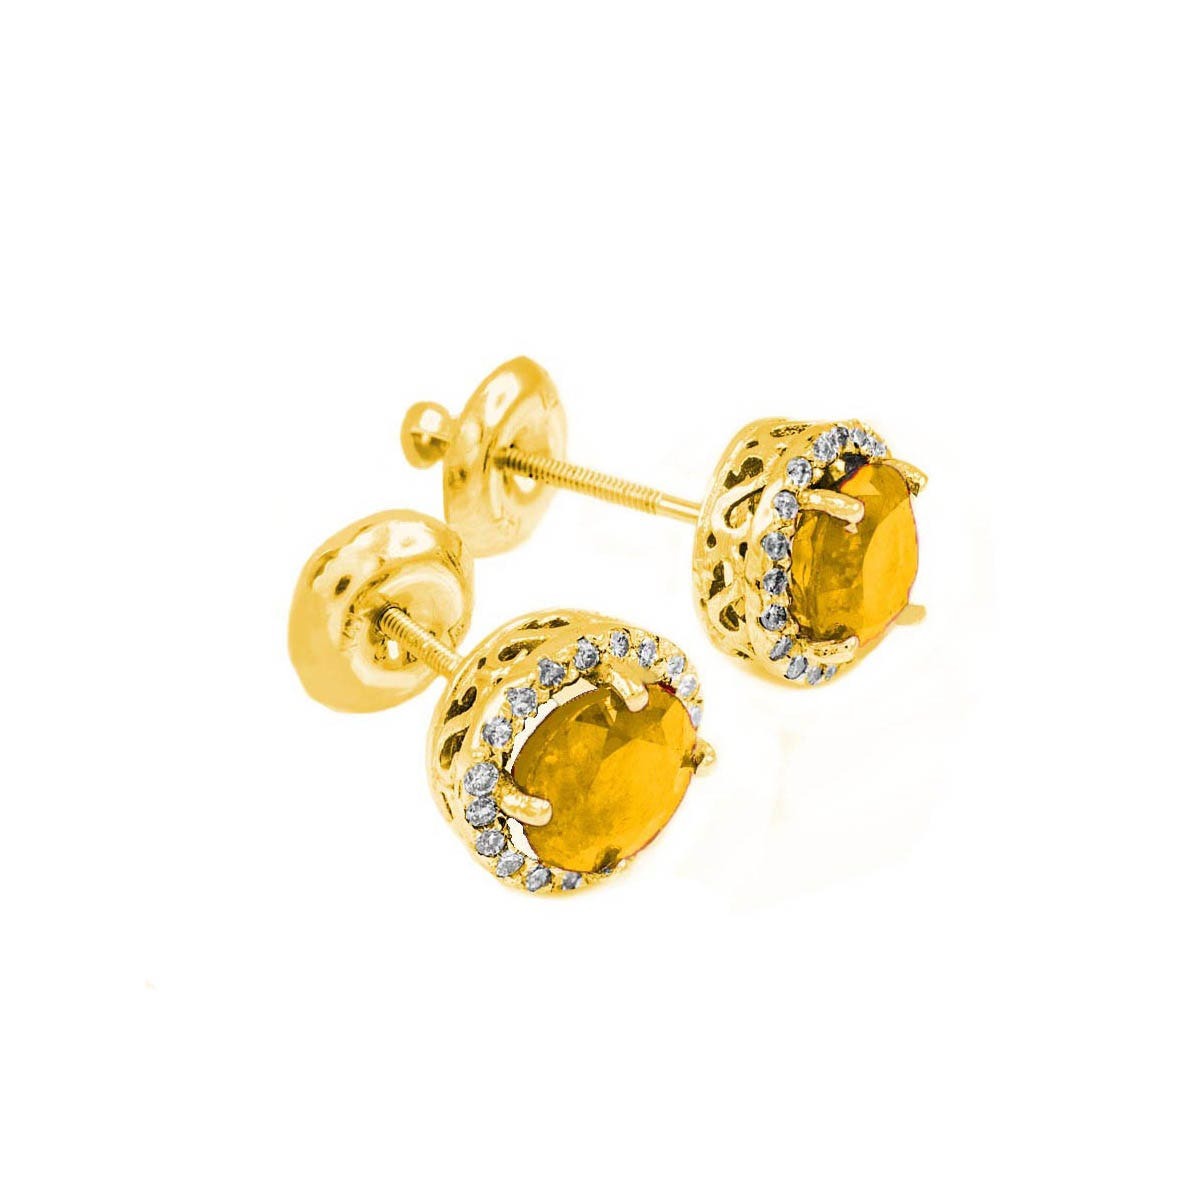 Gold Boutique - Gents Gold Earrings GOOFASH